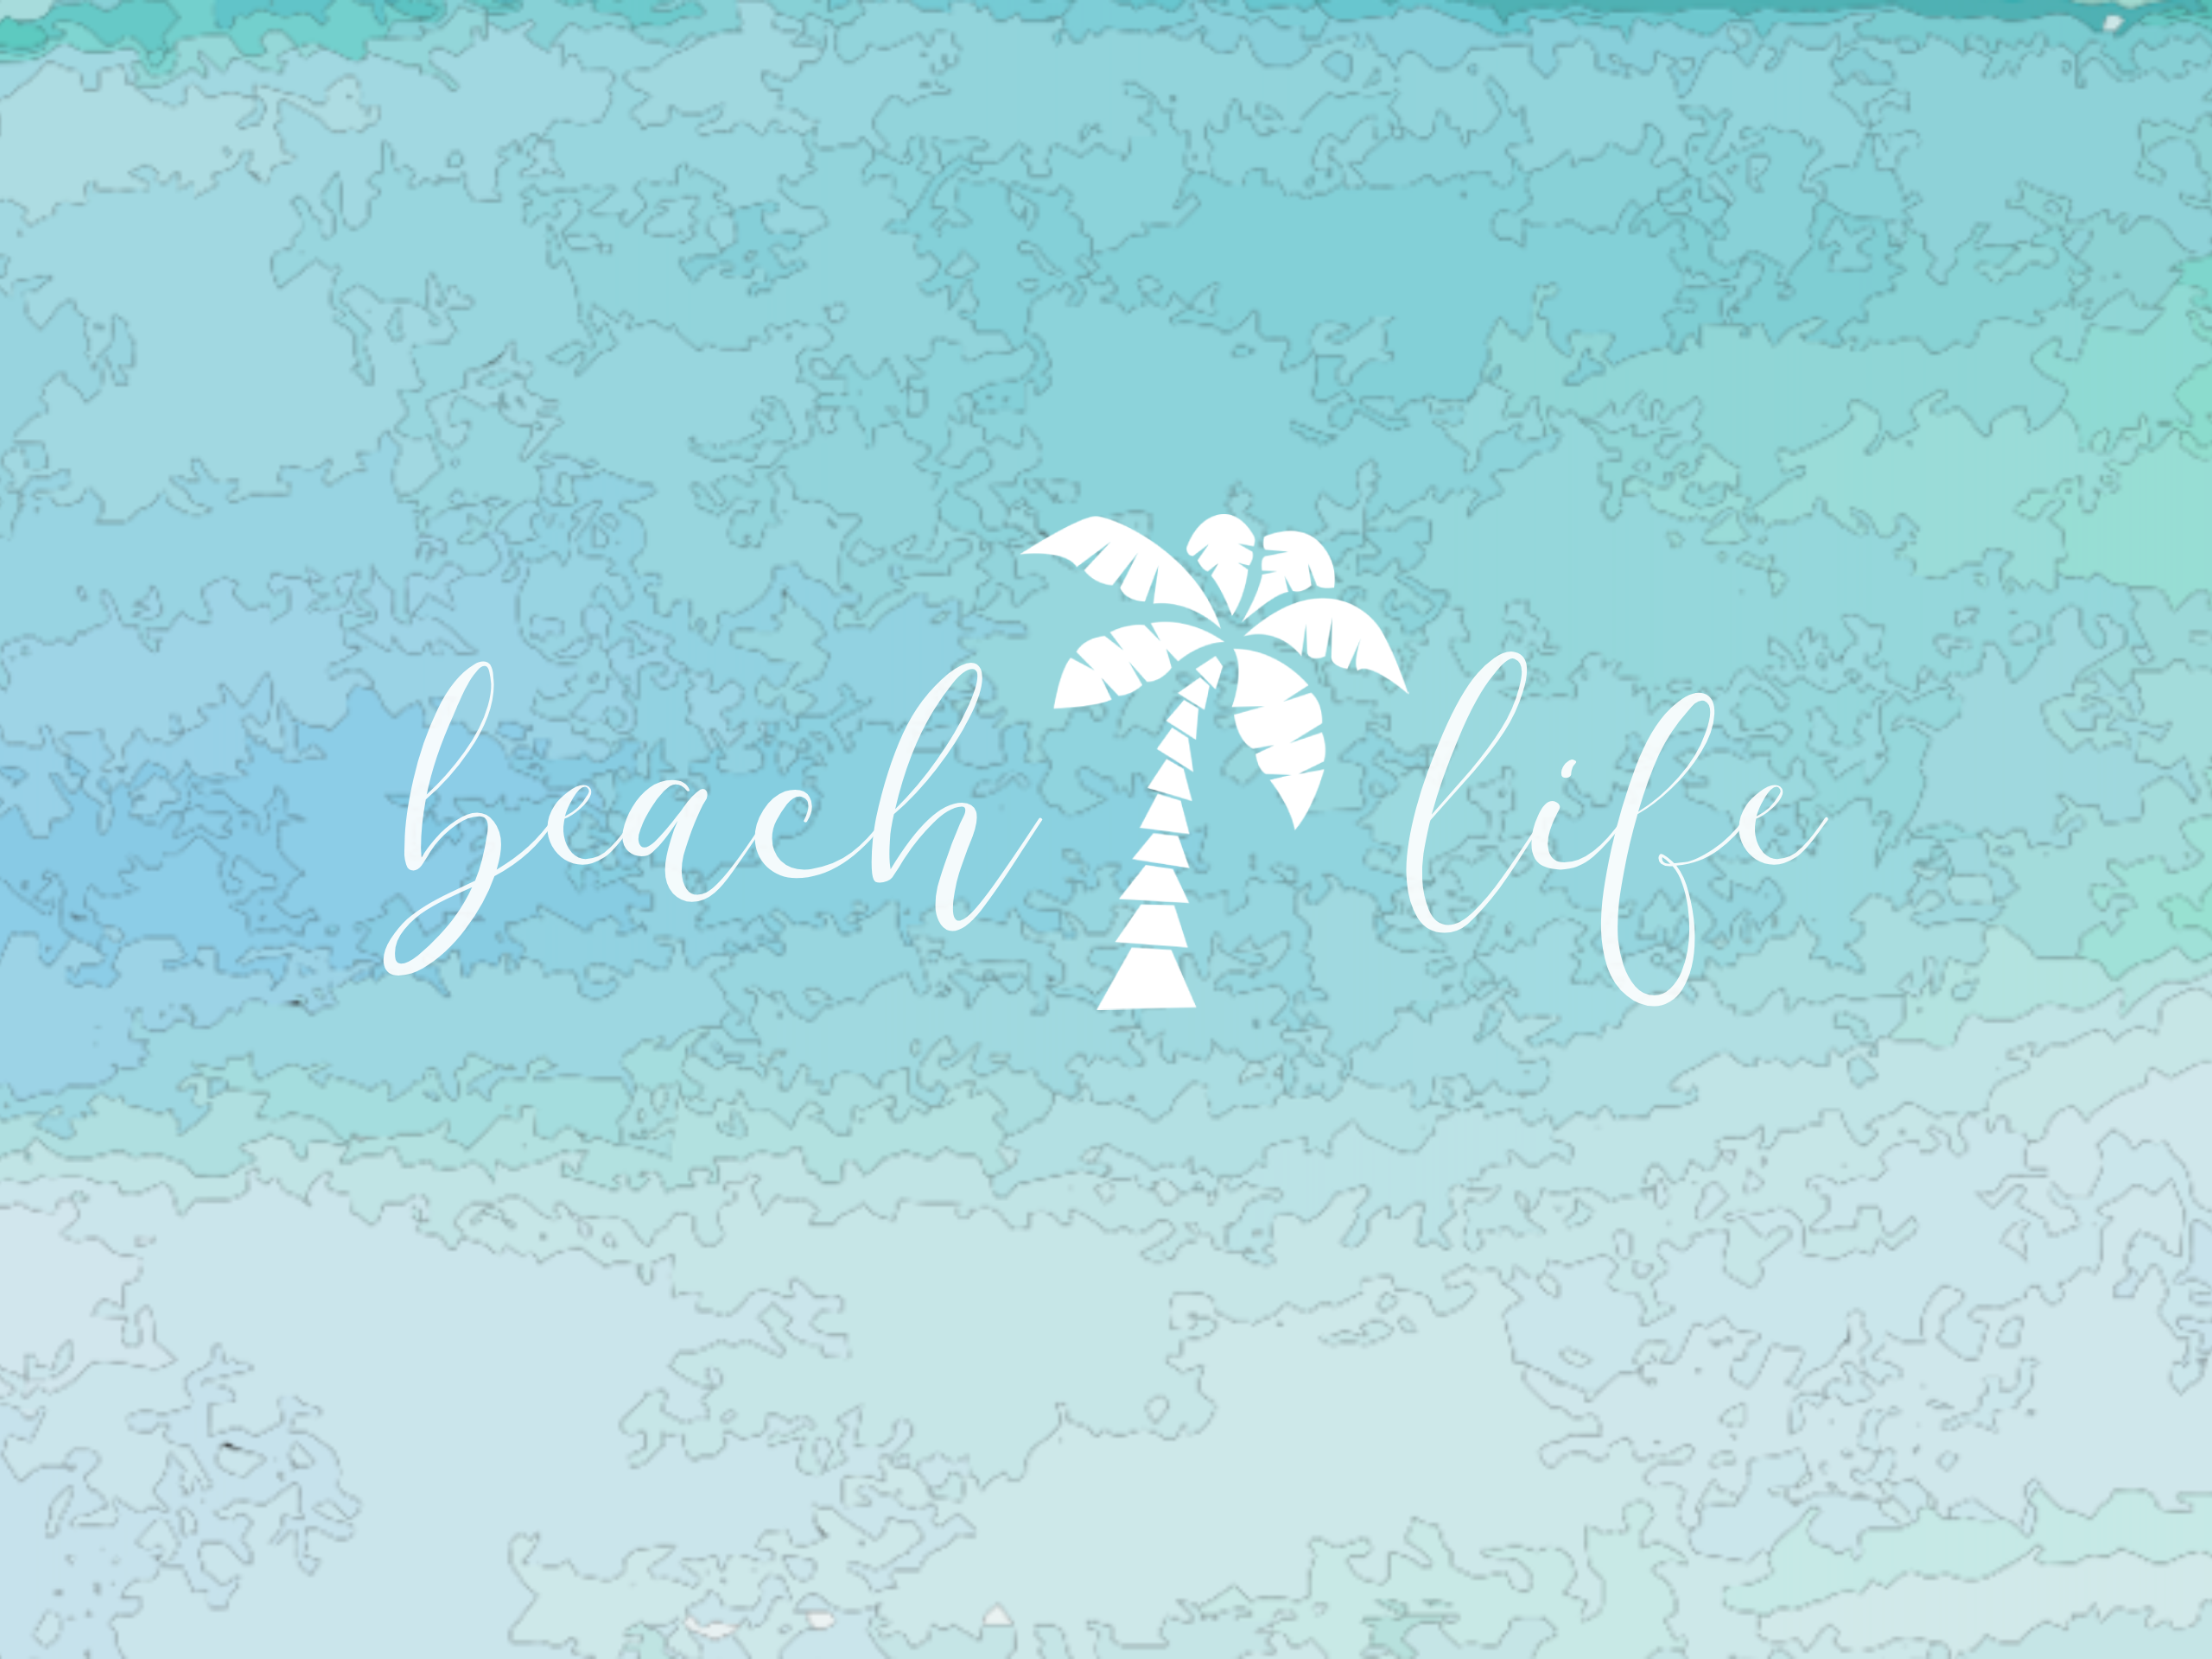 Beach Life Car Decal - Permanent Vinyl Sticker for Cars, Vehicle, Doors, Windows, Laptop, and more!